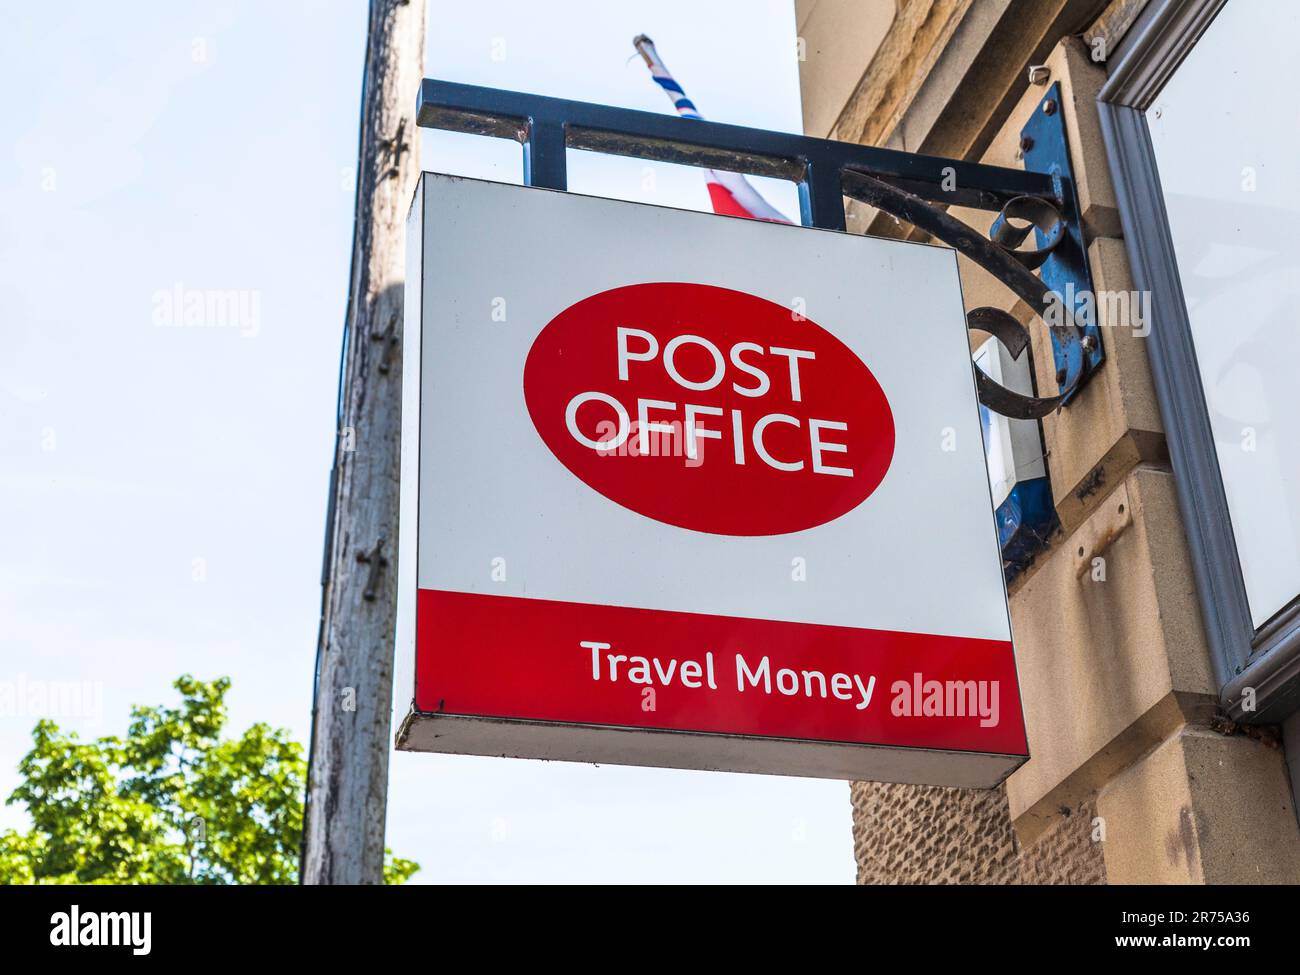 The sign for the Post Office advertising Travel Money in Bakewell,Derbyshire,England, UK Stock Photo